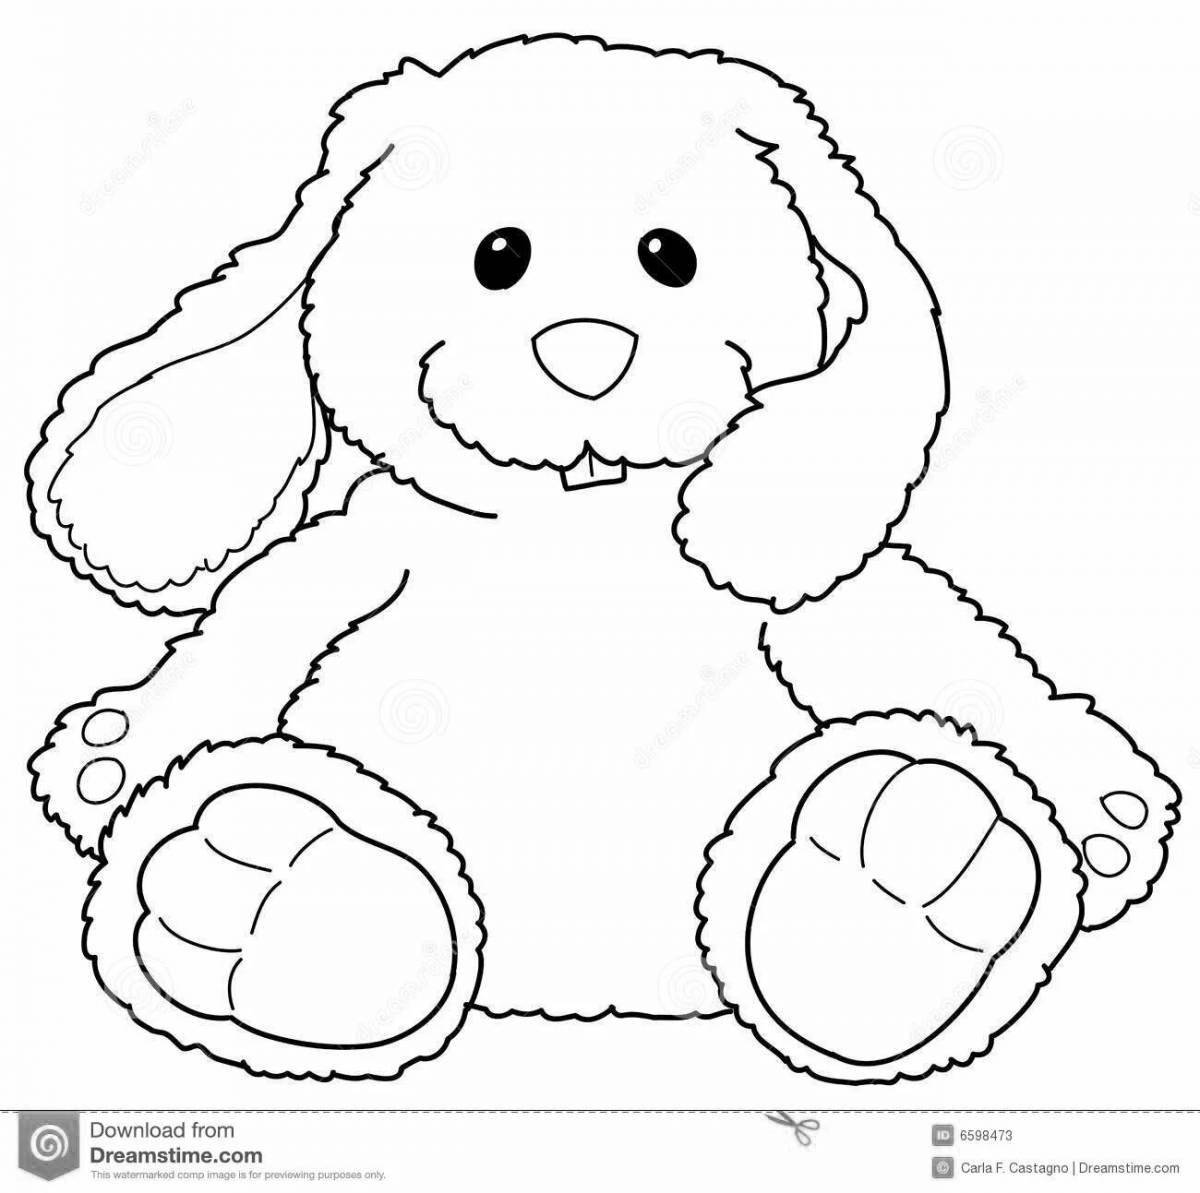 Adorable coloring bunny toy